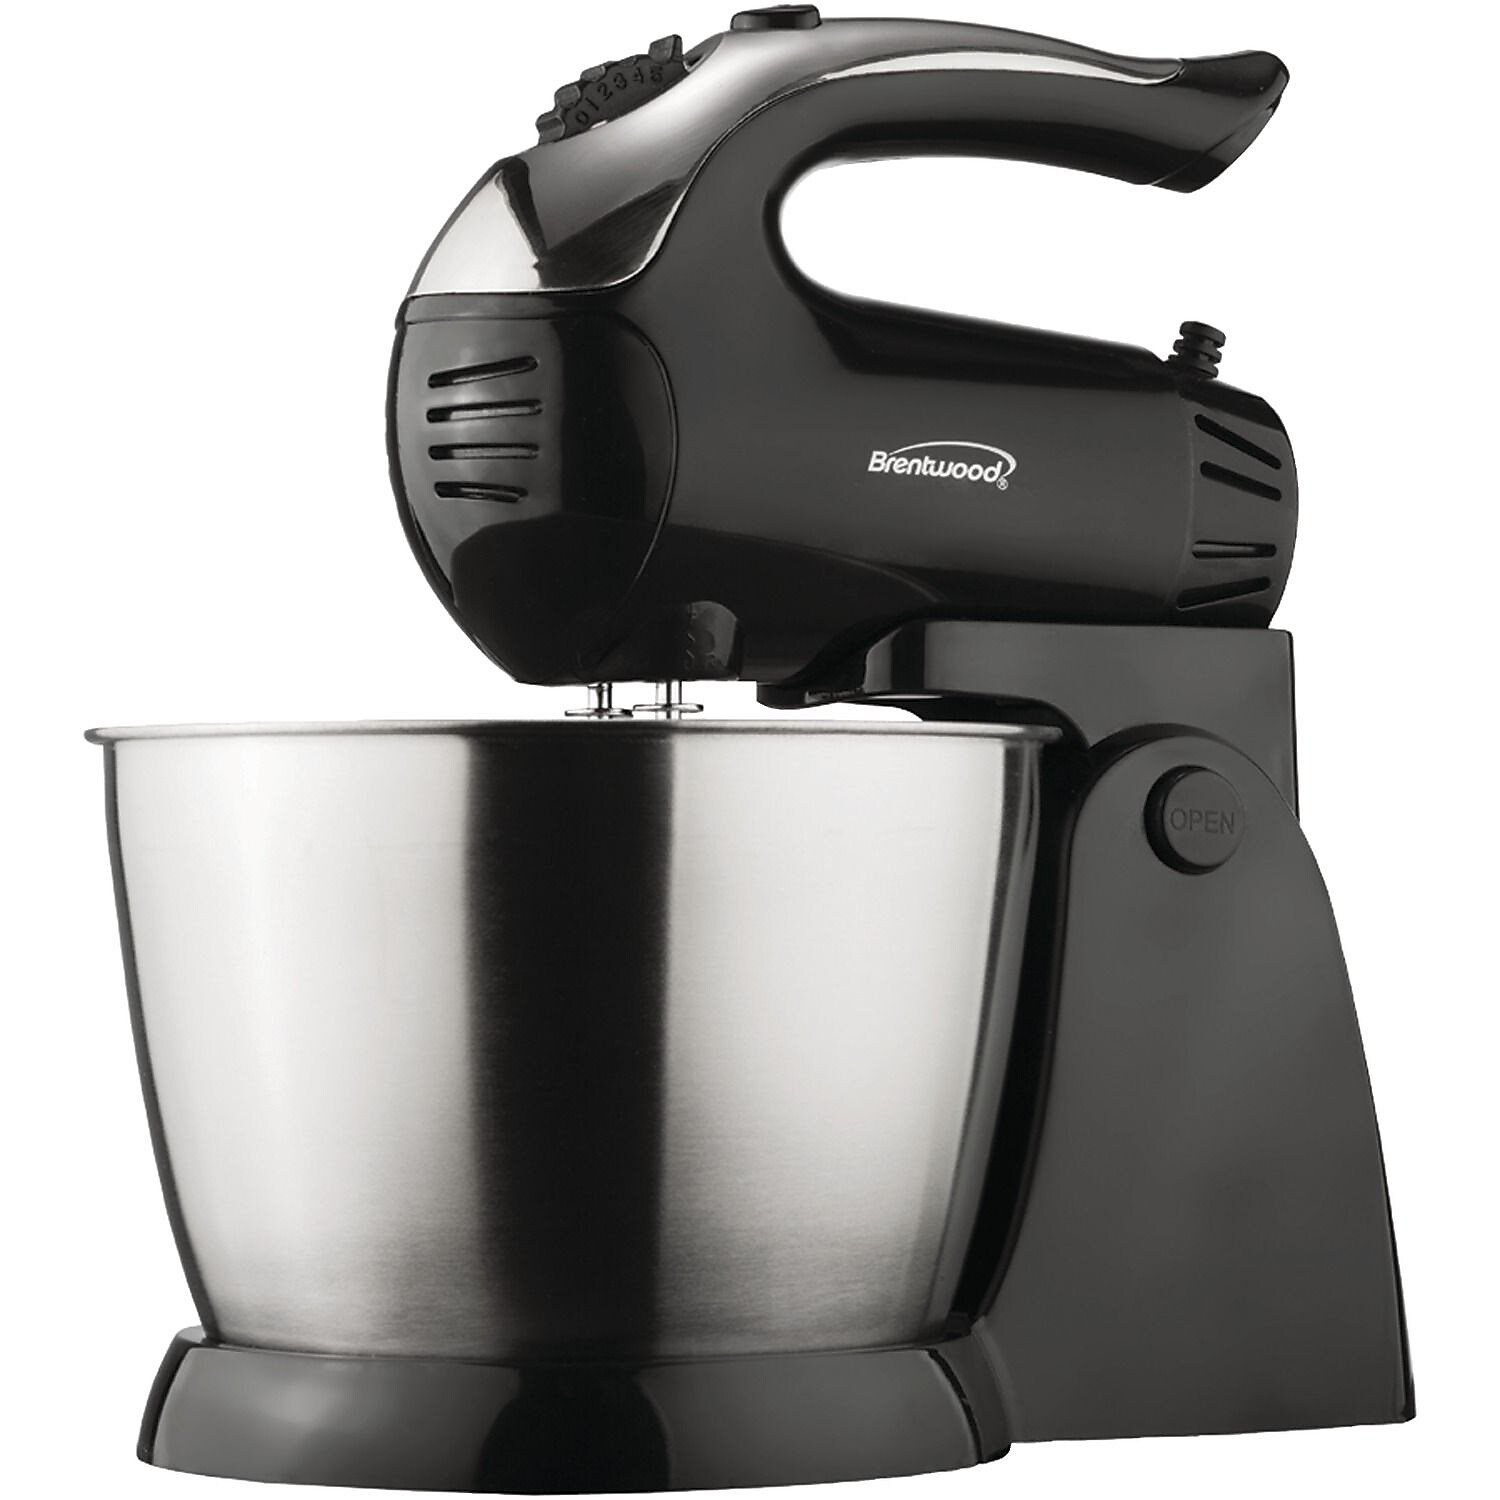 Brentwood New SM-1153 5-Speed + Turbo Stand Mixer, Black - image 1 of 1